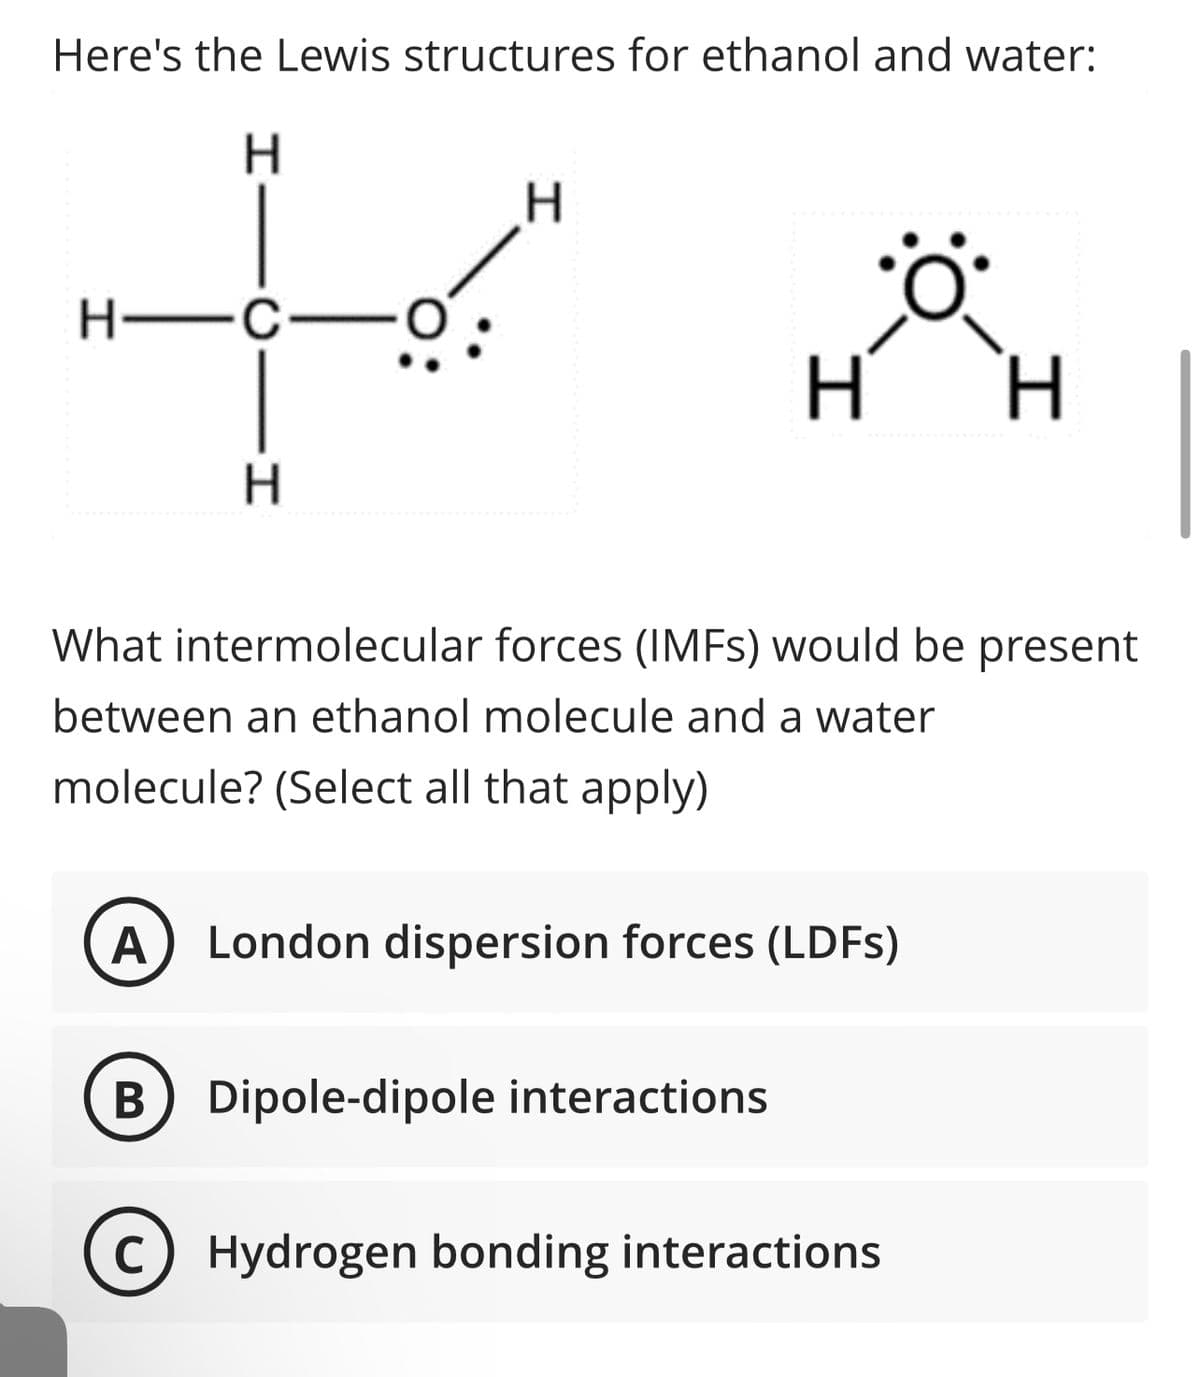 Here's the Lewis structures for ethanol and water:
H
H—C—
H
H
H H
What intermolecular forces (IMFs) would be present
between an ethanol molecule and a water
molecule? (Select all that apply)
A London dispersion forces (LDFs)
B Dipole-dipole interactions
с Hydrogen bonding interactions